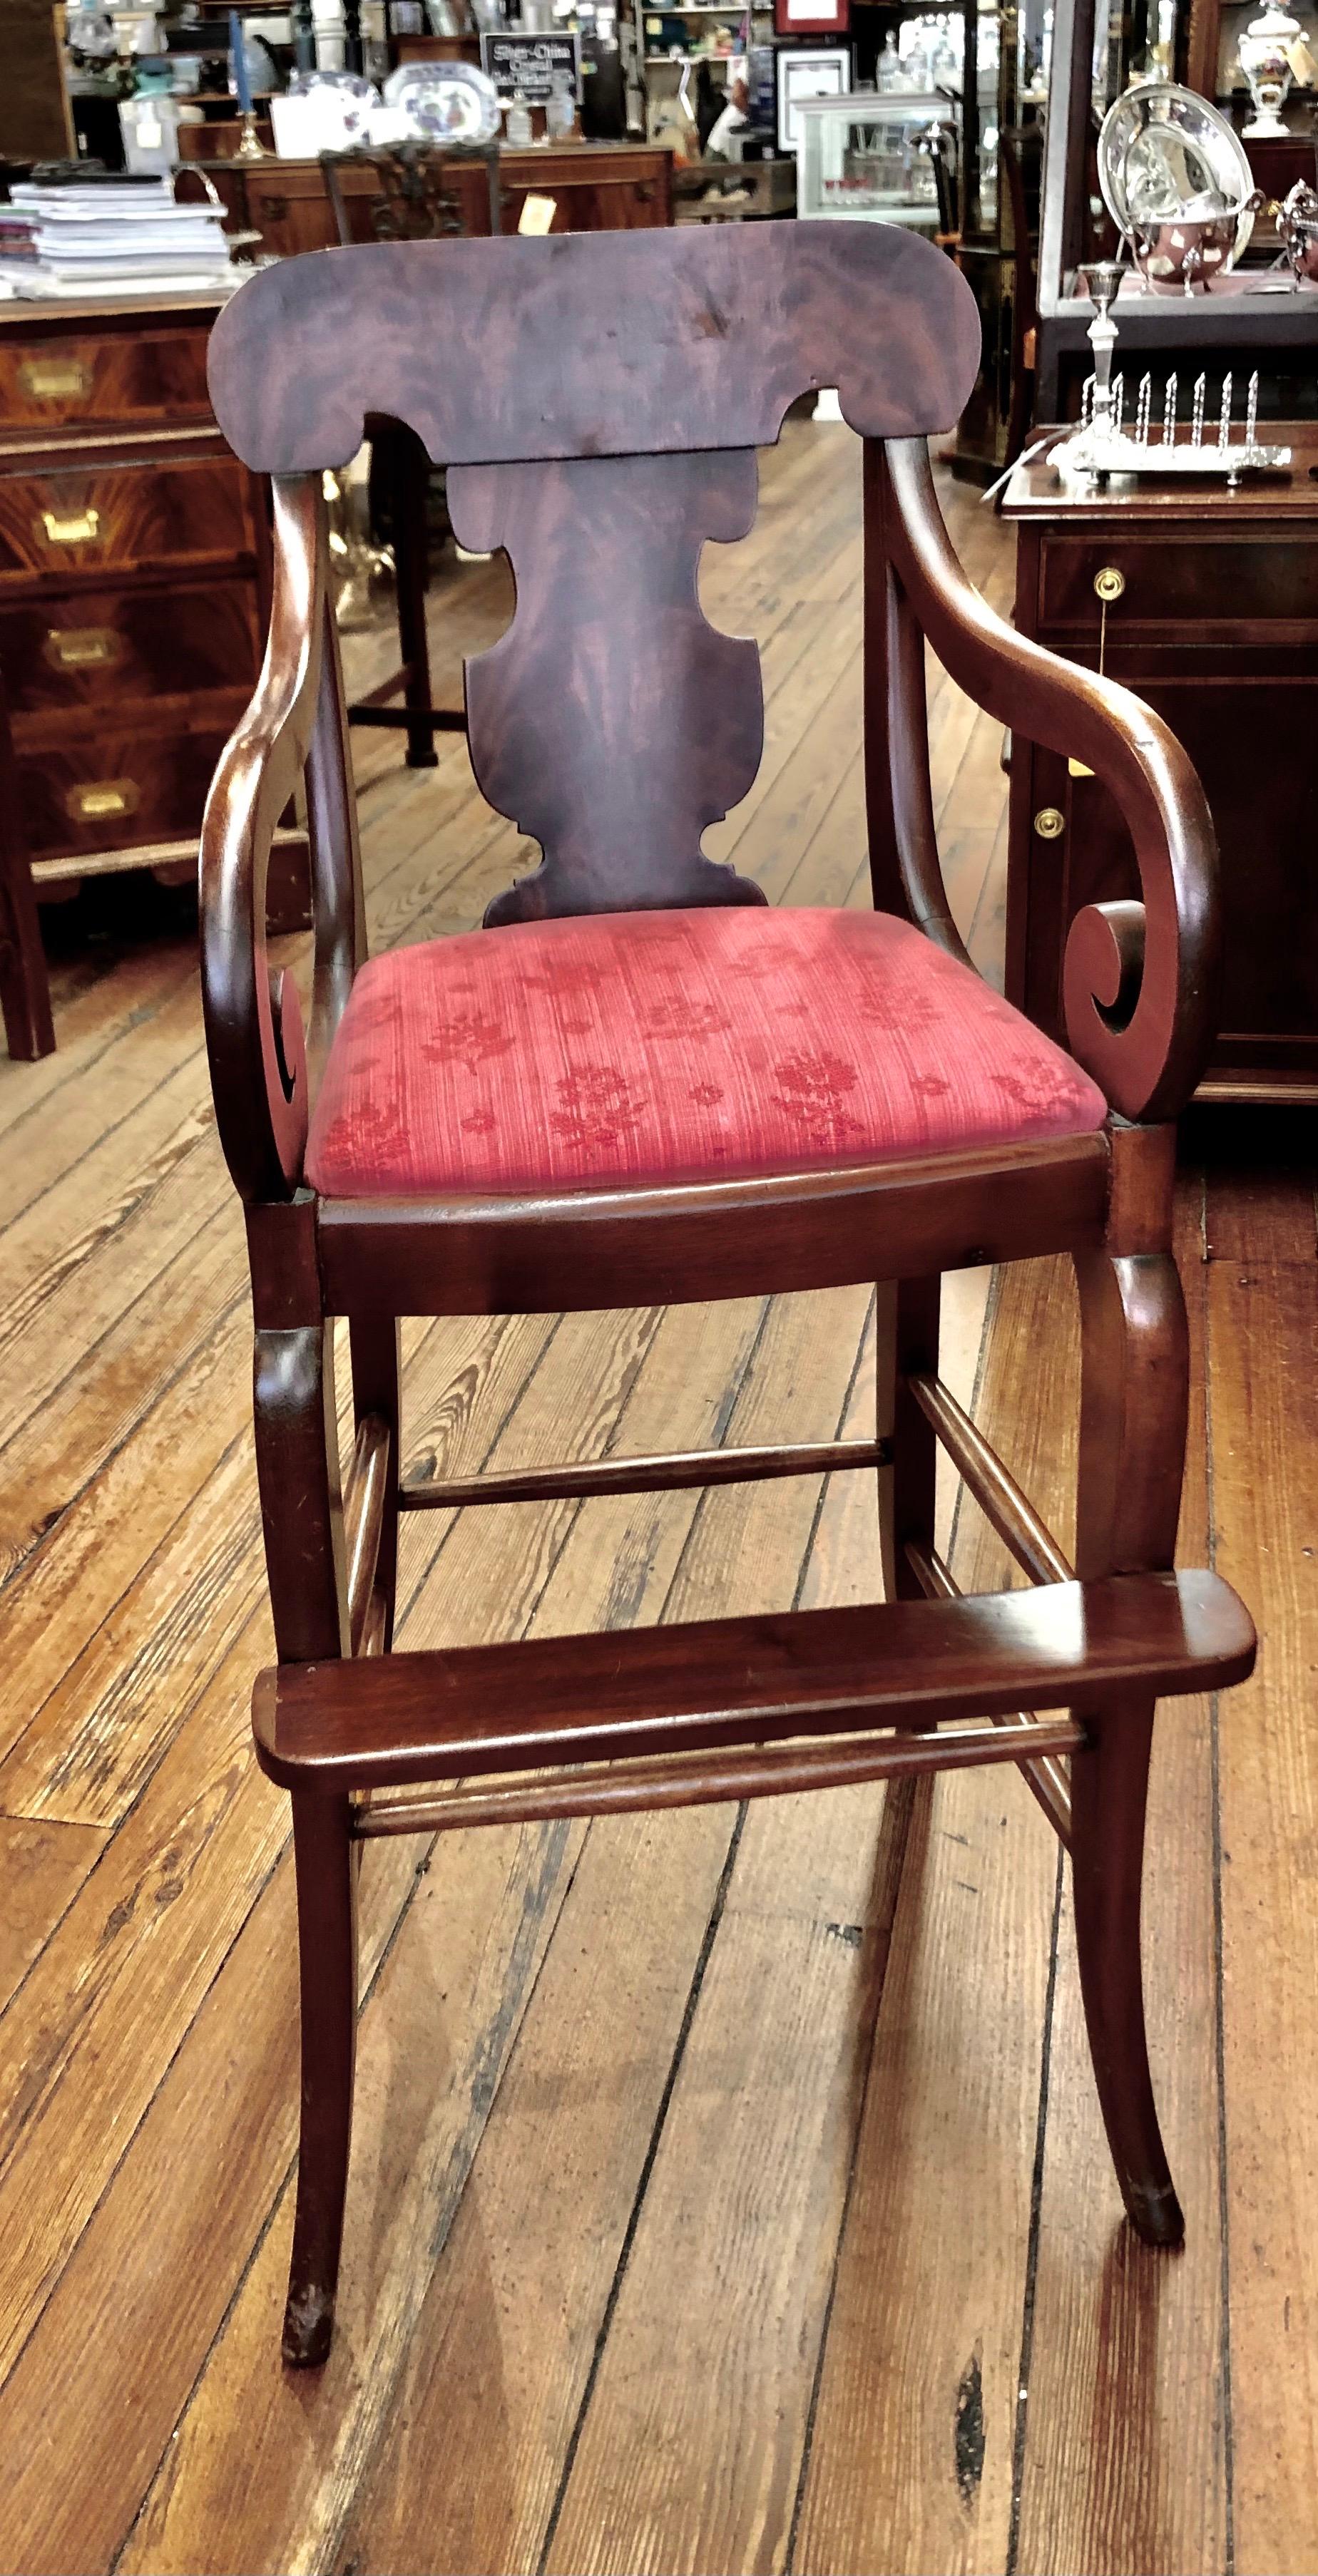 Rare and Fine Antique American Flame Mahogany Empire Style Child’s Highchair 1